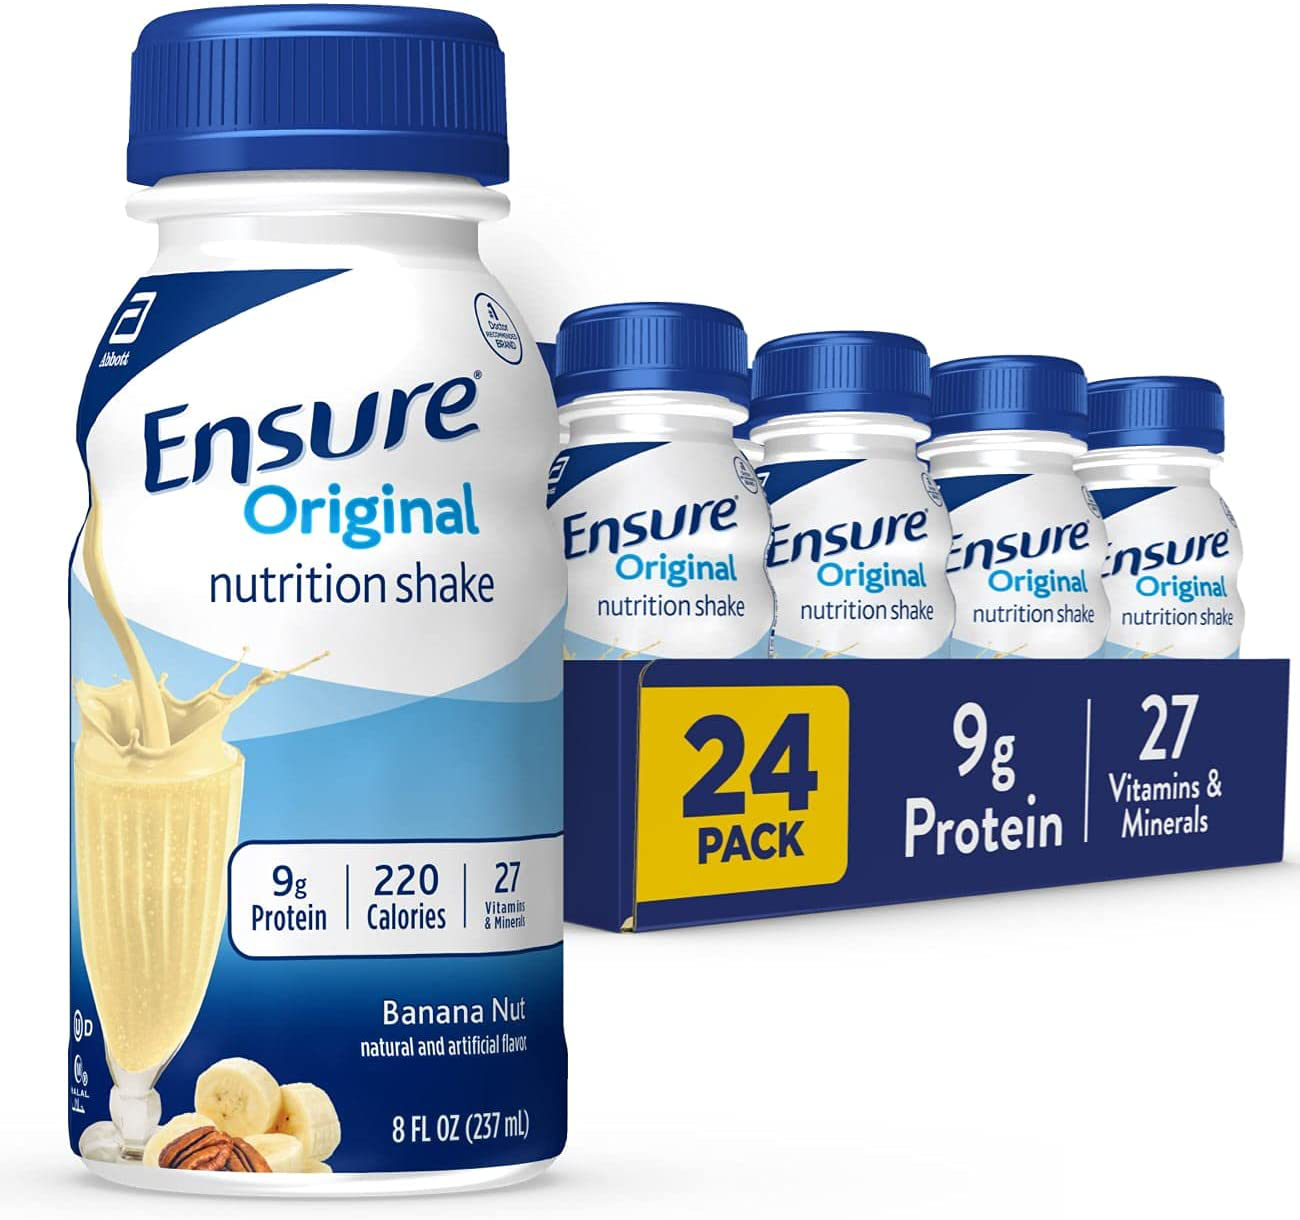 Ensure Original Nutrition Shake, Small Meal Replacement Shake, Complete, Balanced Nutrition with Nutrients to Support Immune System Health